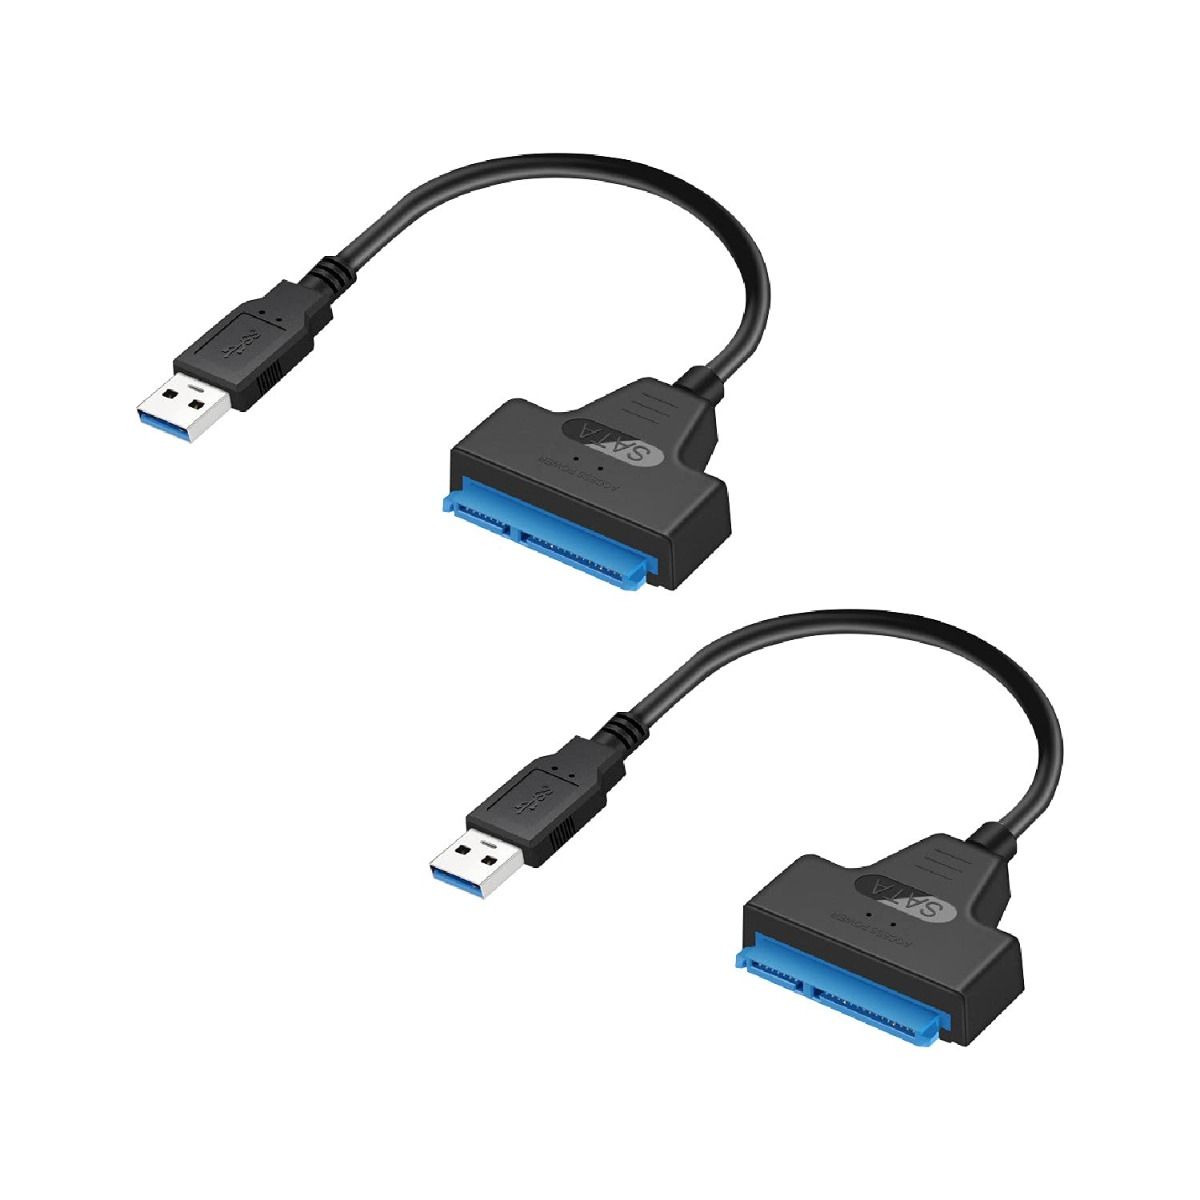 SATA to USB Cable for Raspberry Pi, USB to SSD External Converter, 2-Pack